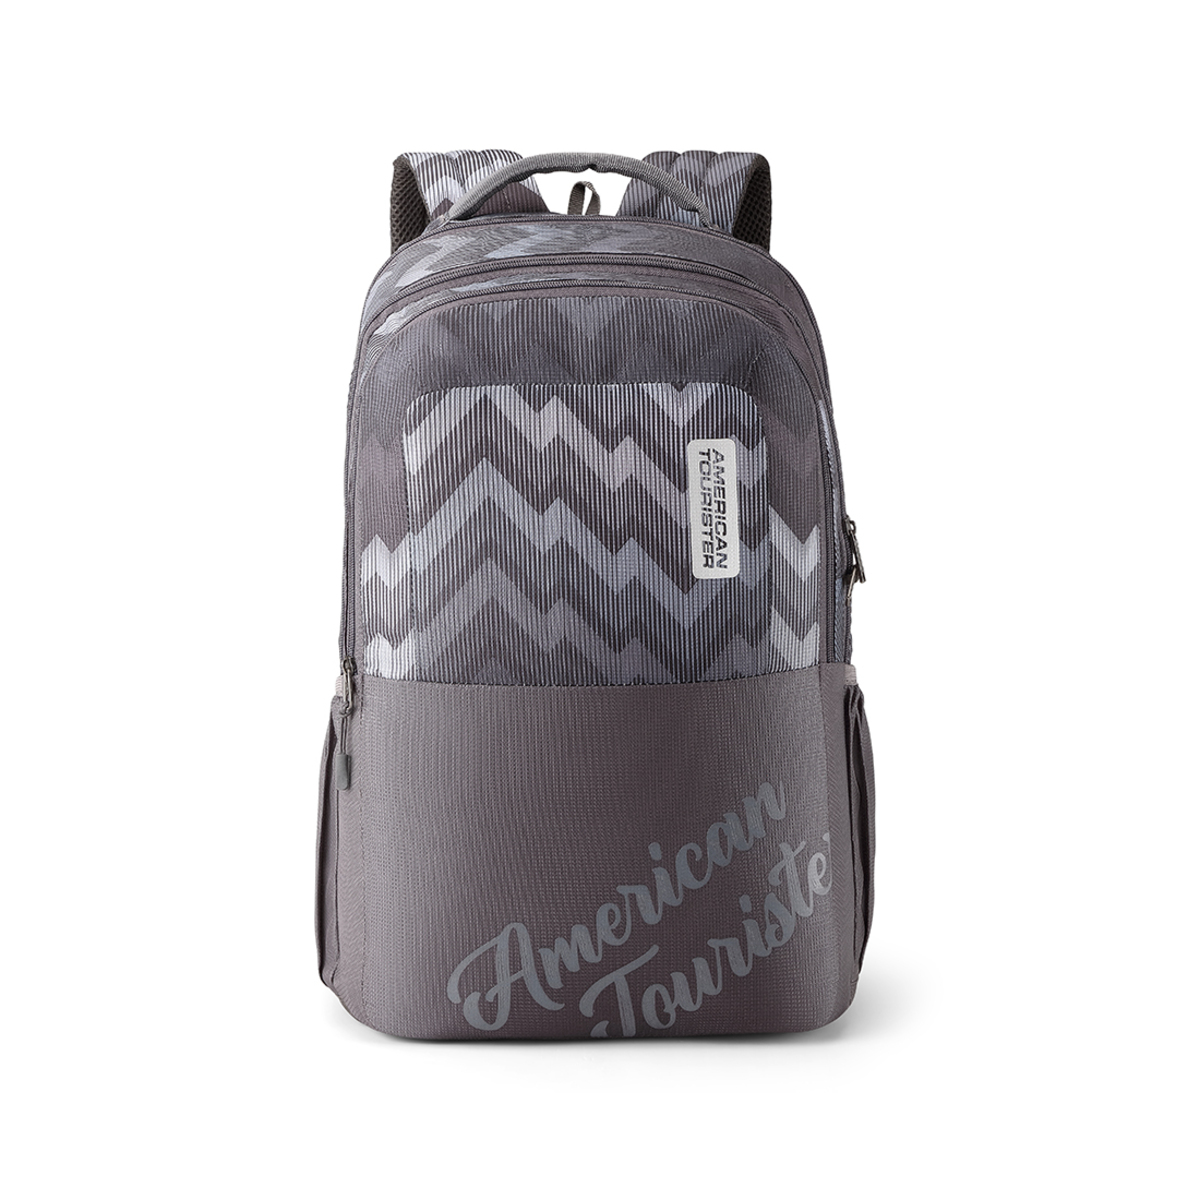 American Tourister Back Pack Crone 05 Grey